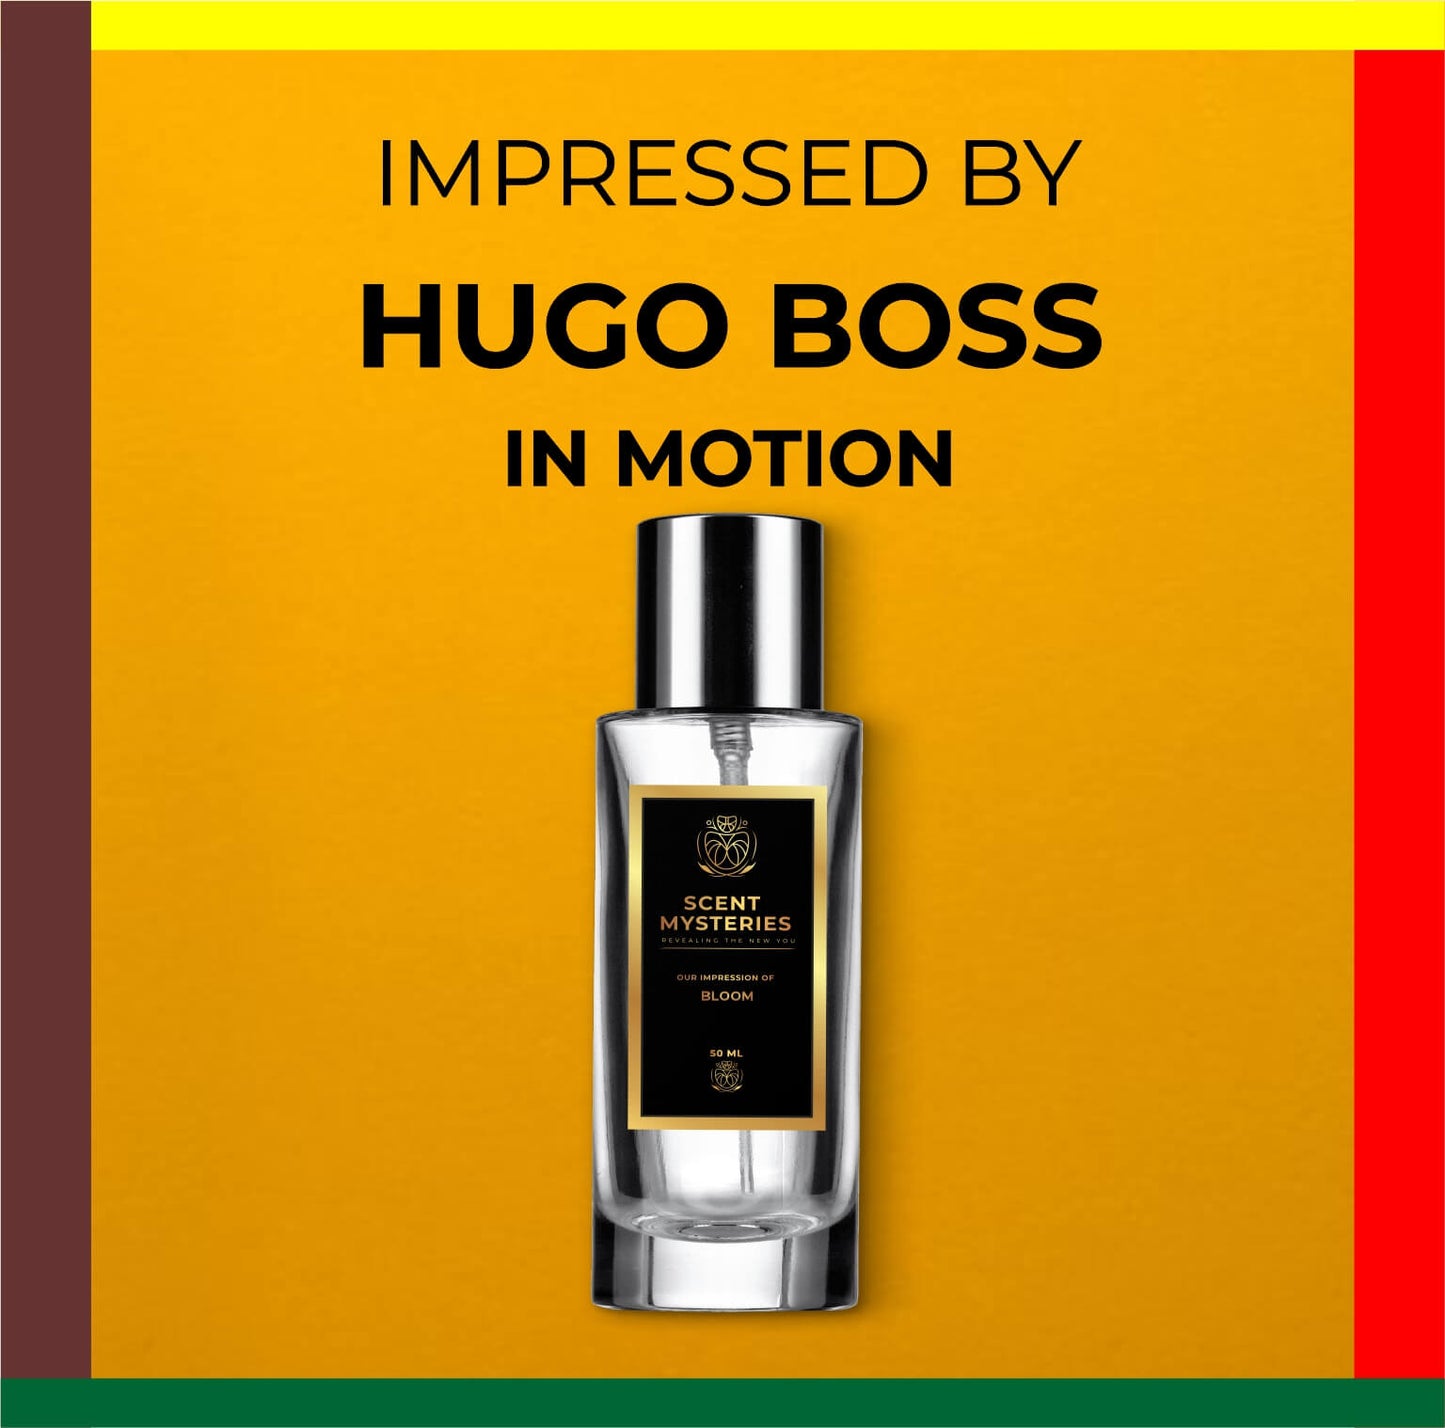 Our Impression of Hugo Boss in Motion